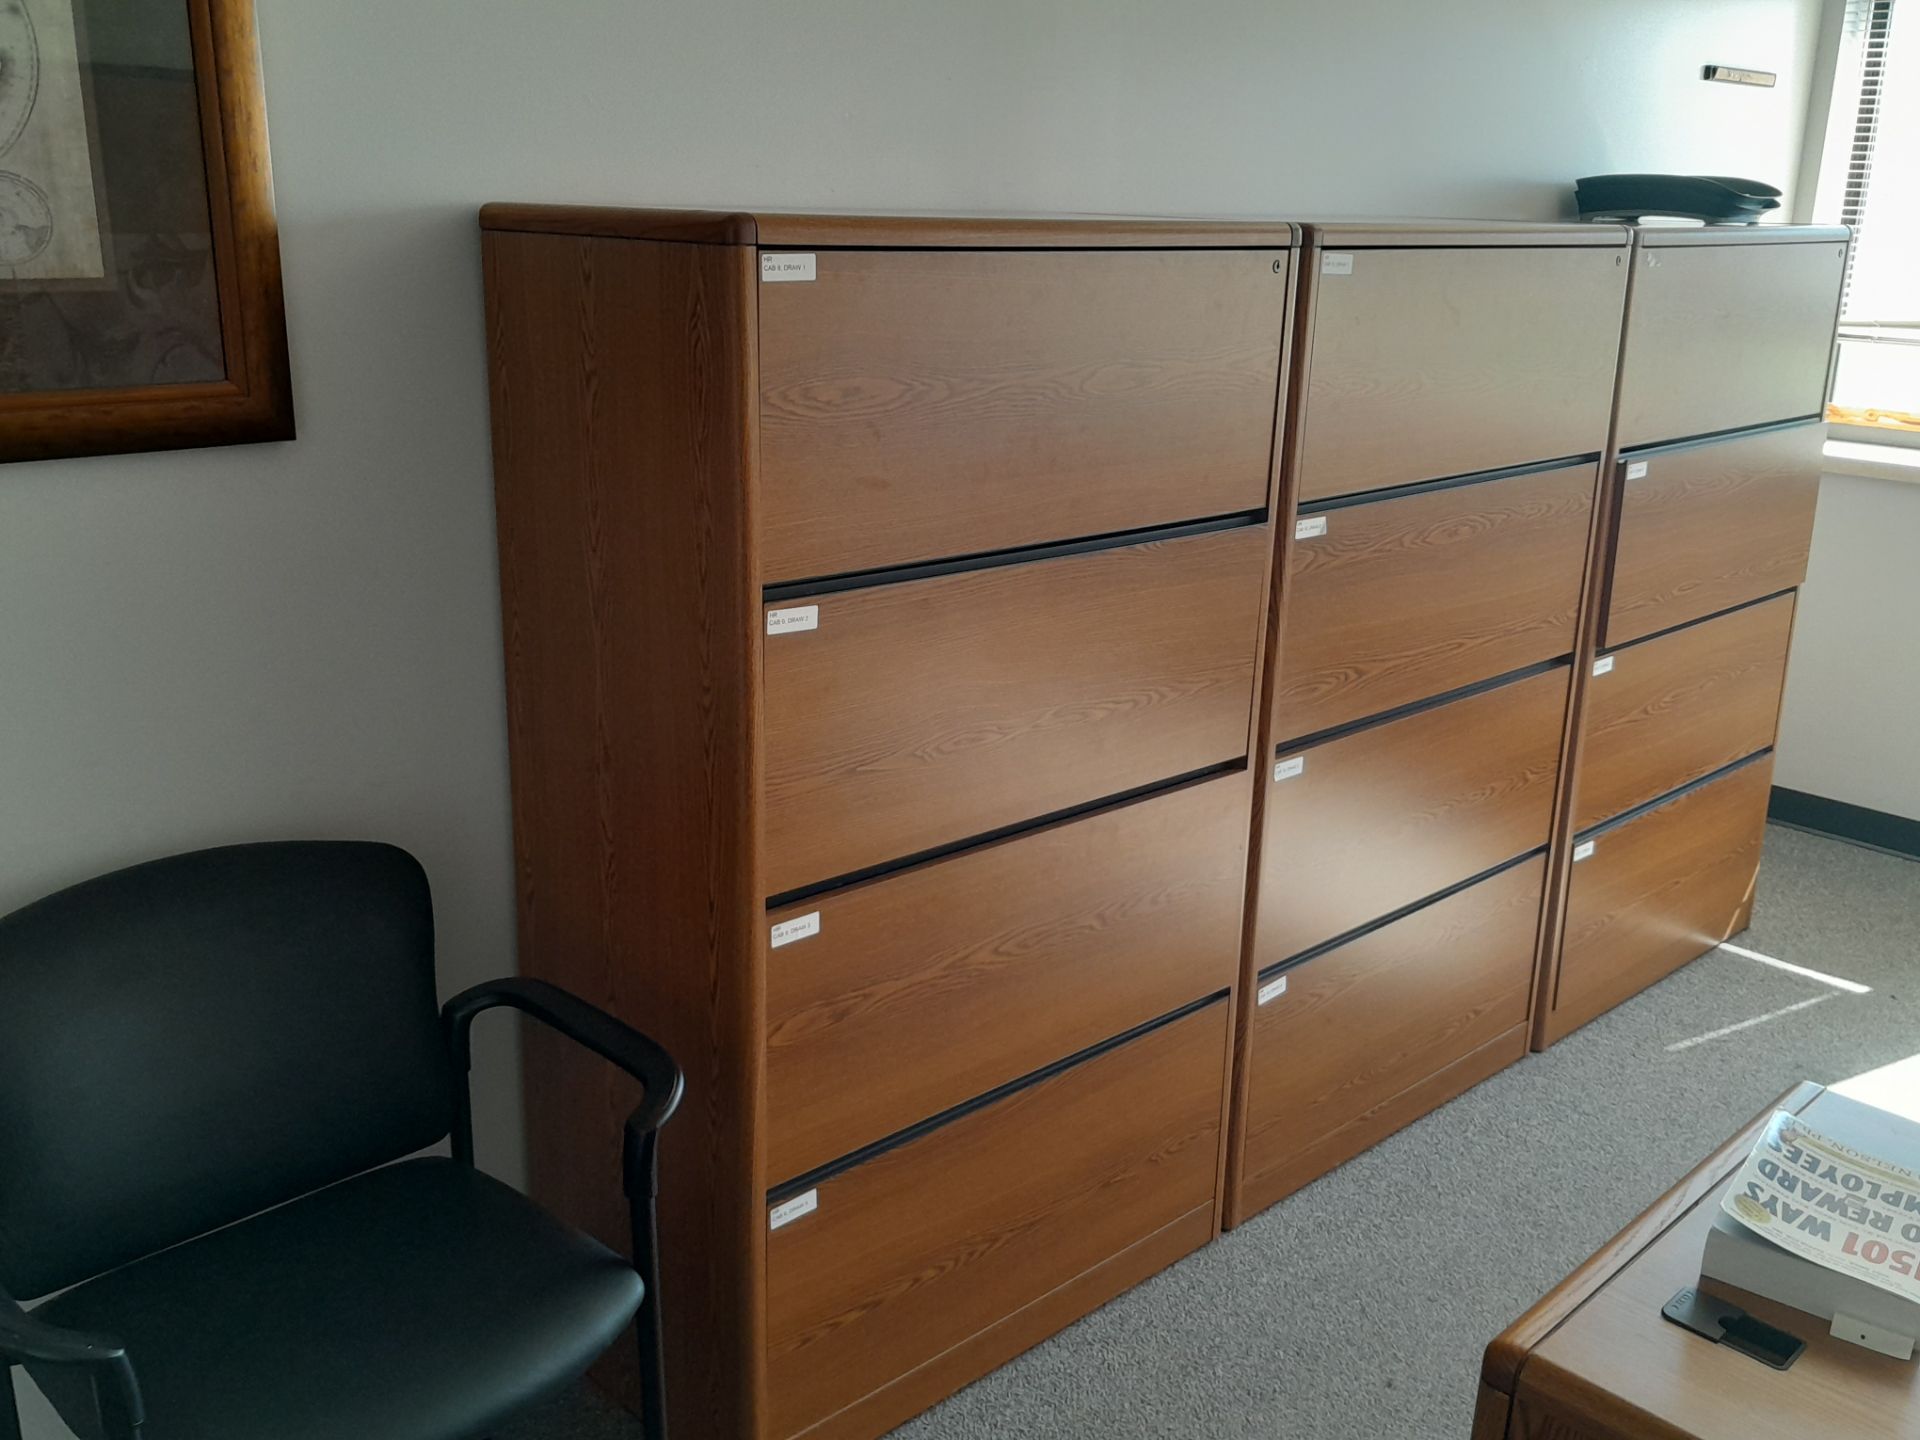 72" X 96" L-SHAPED DESK, (3) 4-DRAWER LATERAL CABINETS, (1) BOOK CASE, (3) CHAIRS - Image 2 of 3